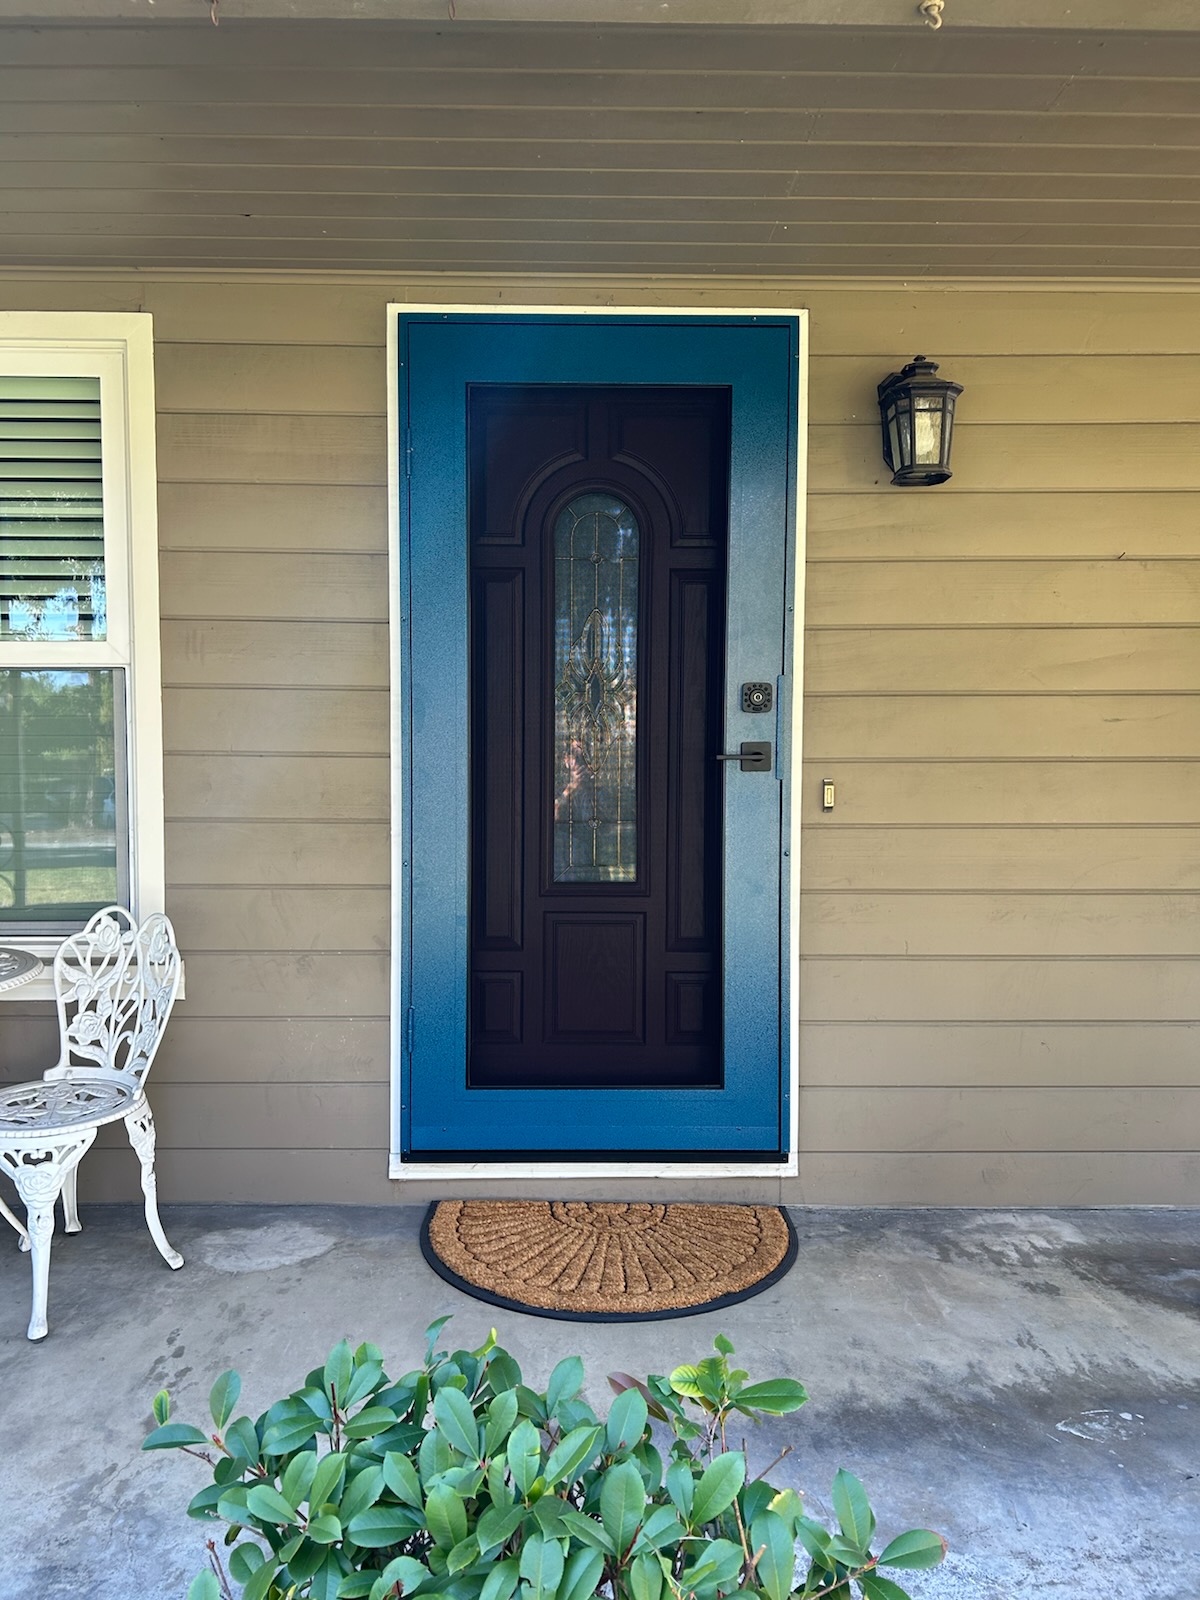 Elevate Your home's Security and Comfort with California Security Screens